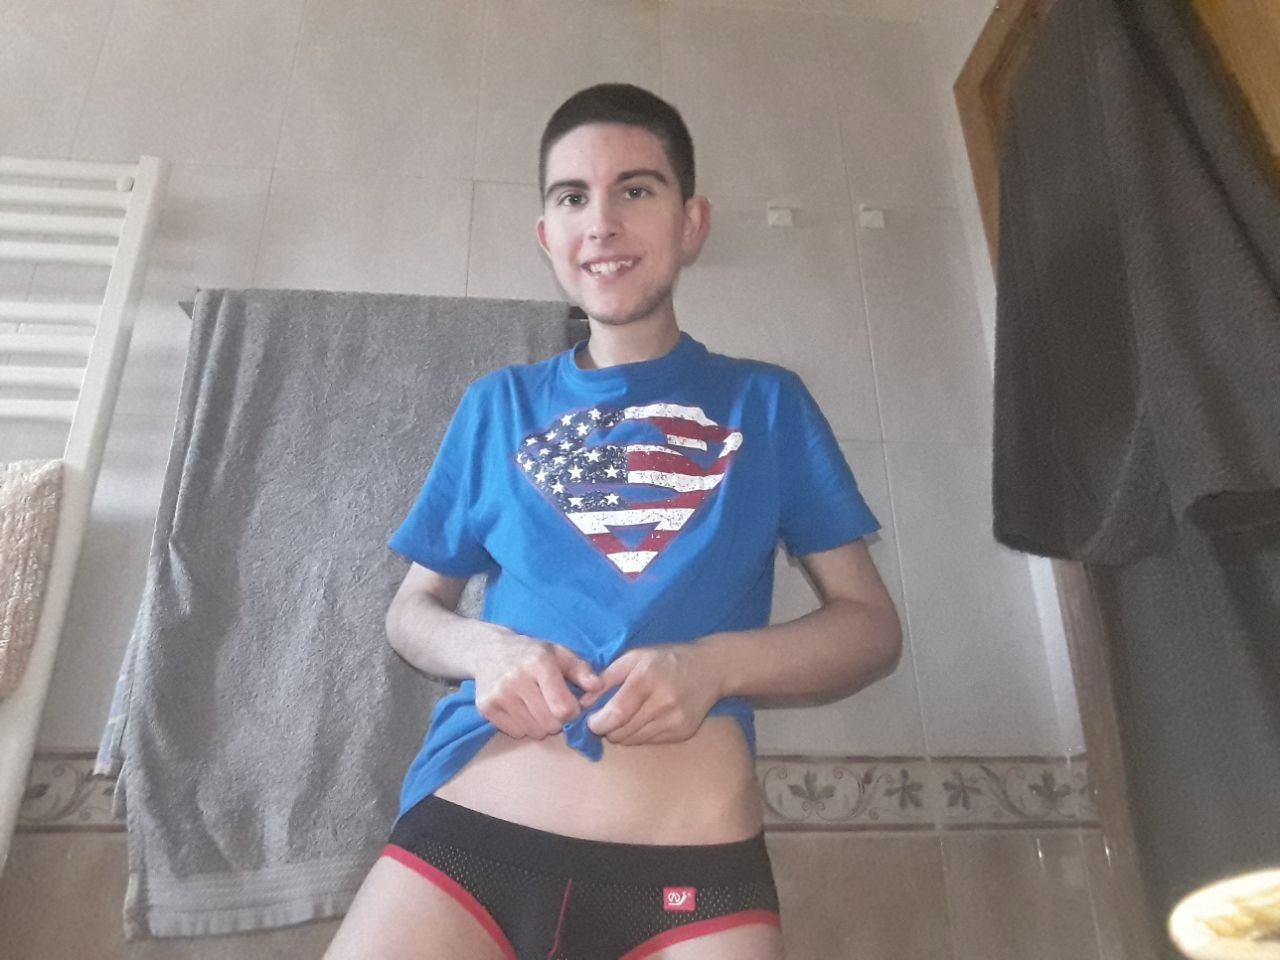 Watch the Photo by Cody Bryan Maverick with the username @codymaverick, who is a star user, posted on May 23, 2019 and the text says 'Someone interested on purchase a custom vid? DM if interested. So I record it today'